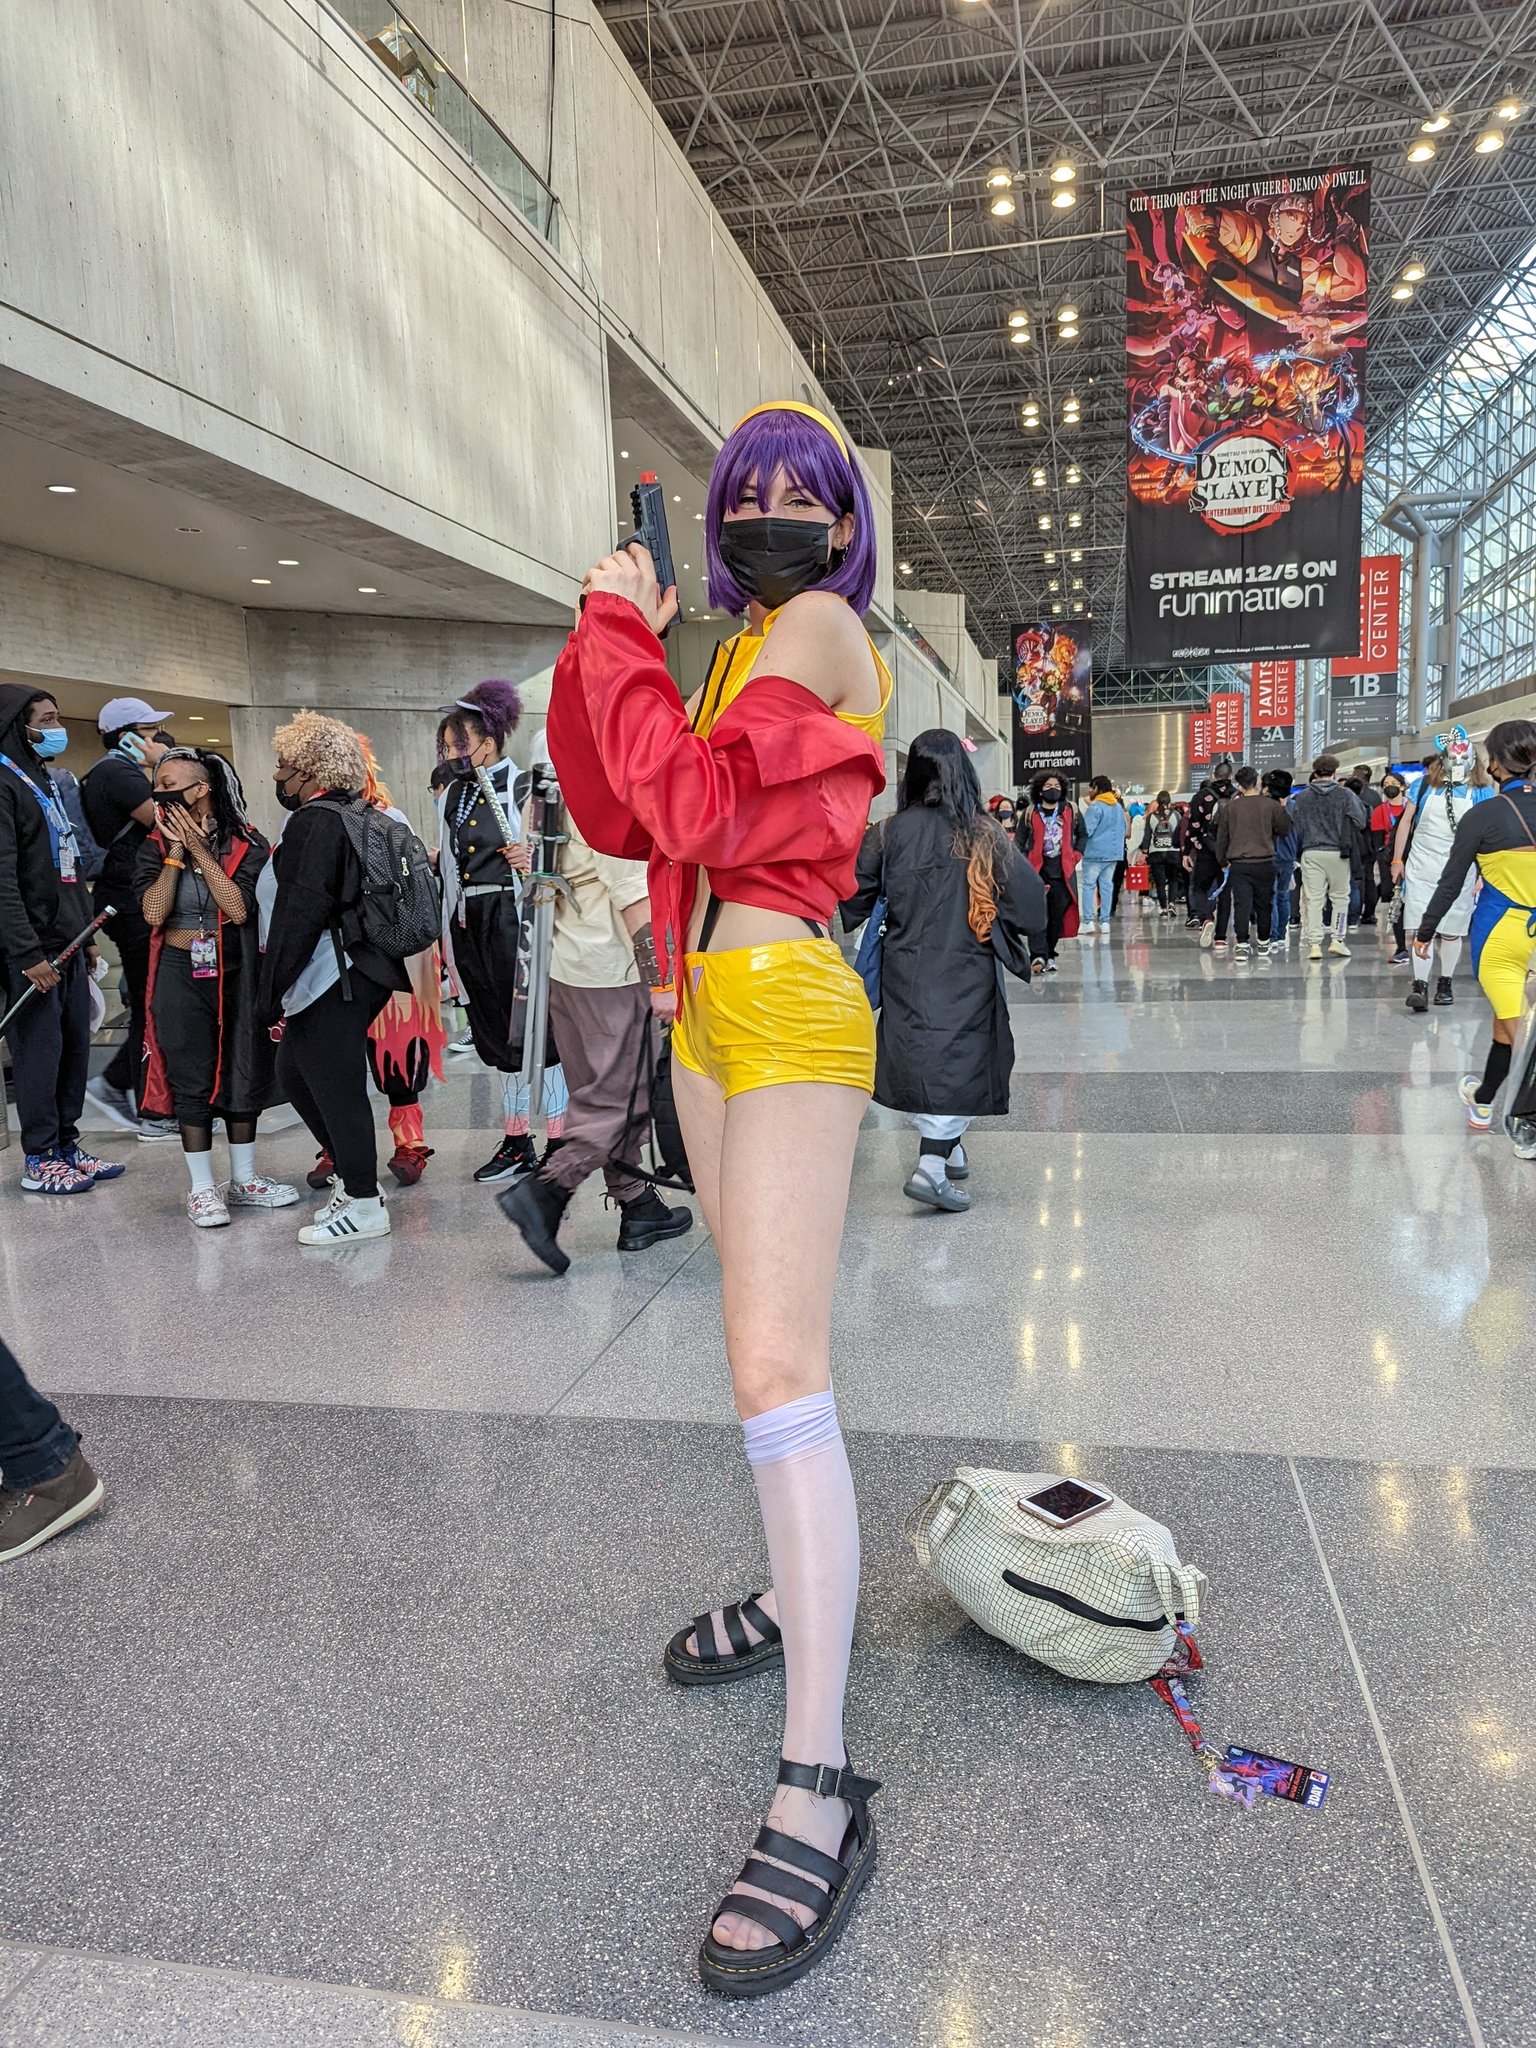 Anime NYC cosplayers were out in full force this year | Popverse